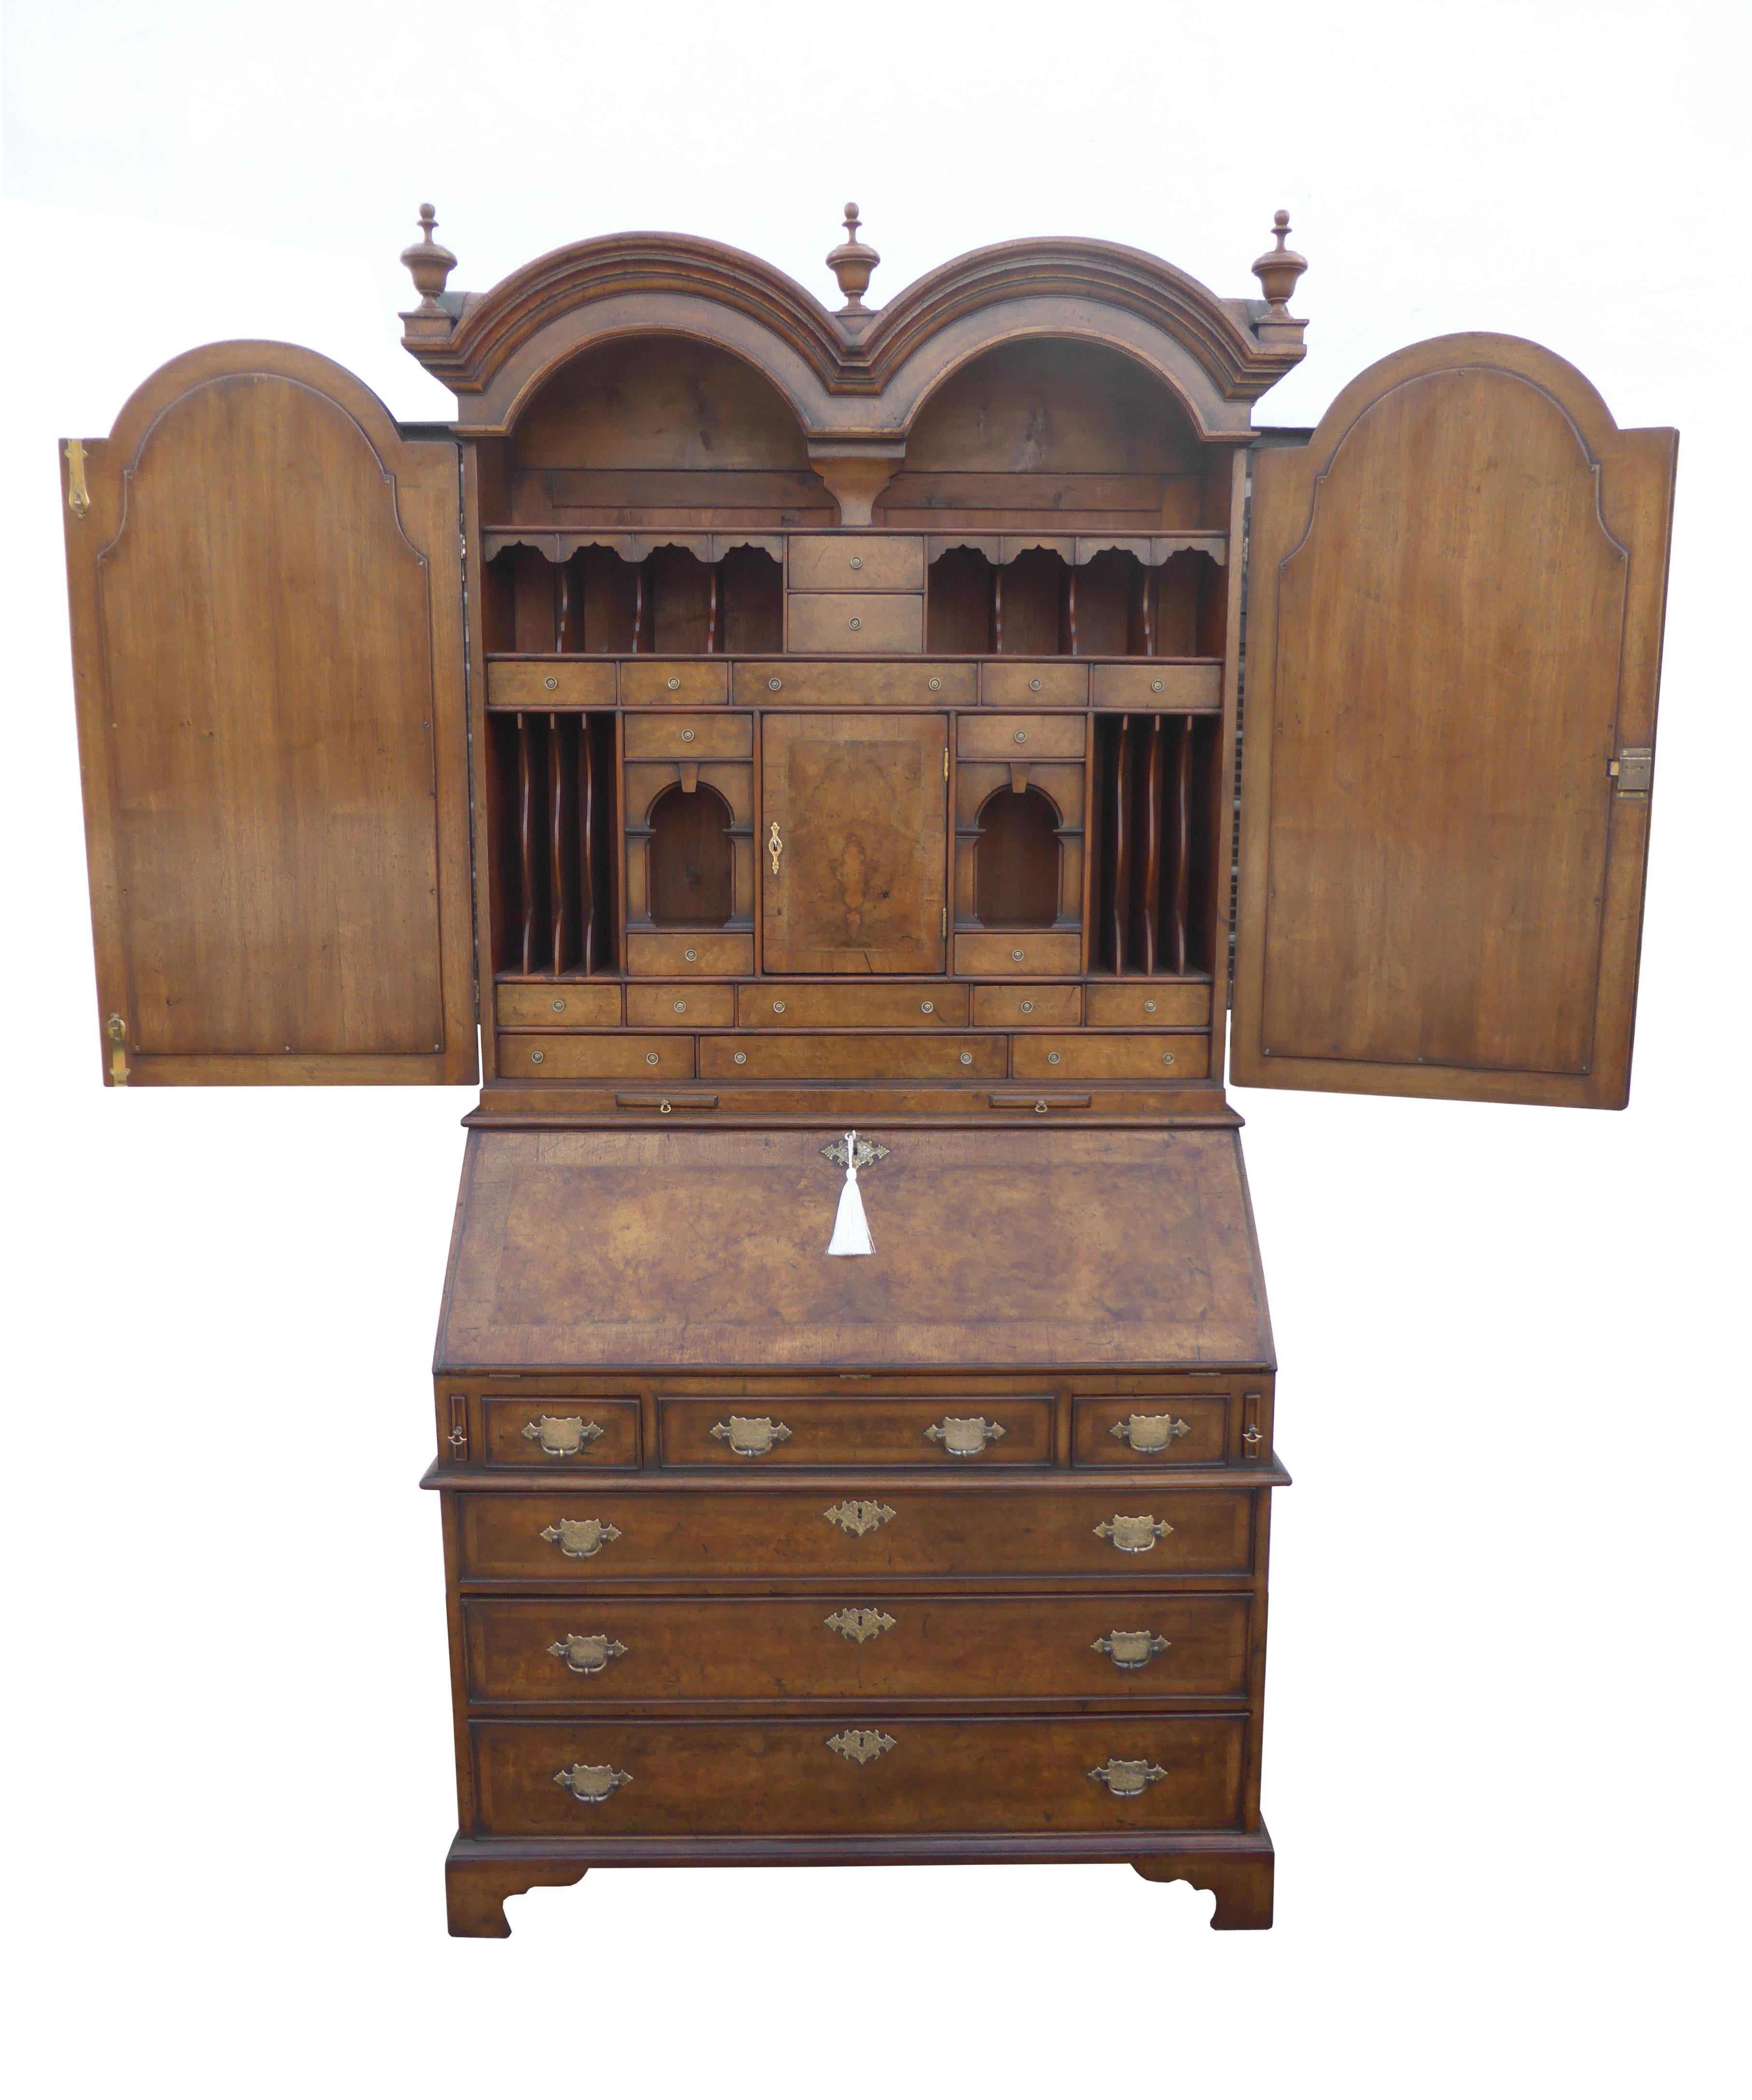 For sale is a very good quality burr walnut dome top bureau bookcase. The top of the bookcase has three finials with two glazed doors below. The doors open to reveal a superbly fitted interior which includes multiple drawers, pigeon holes and